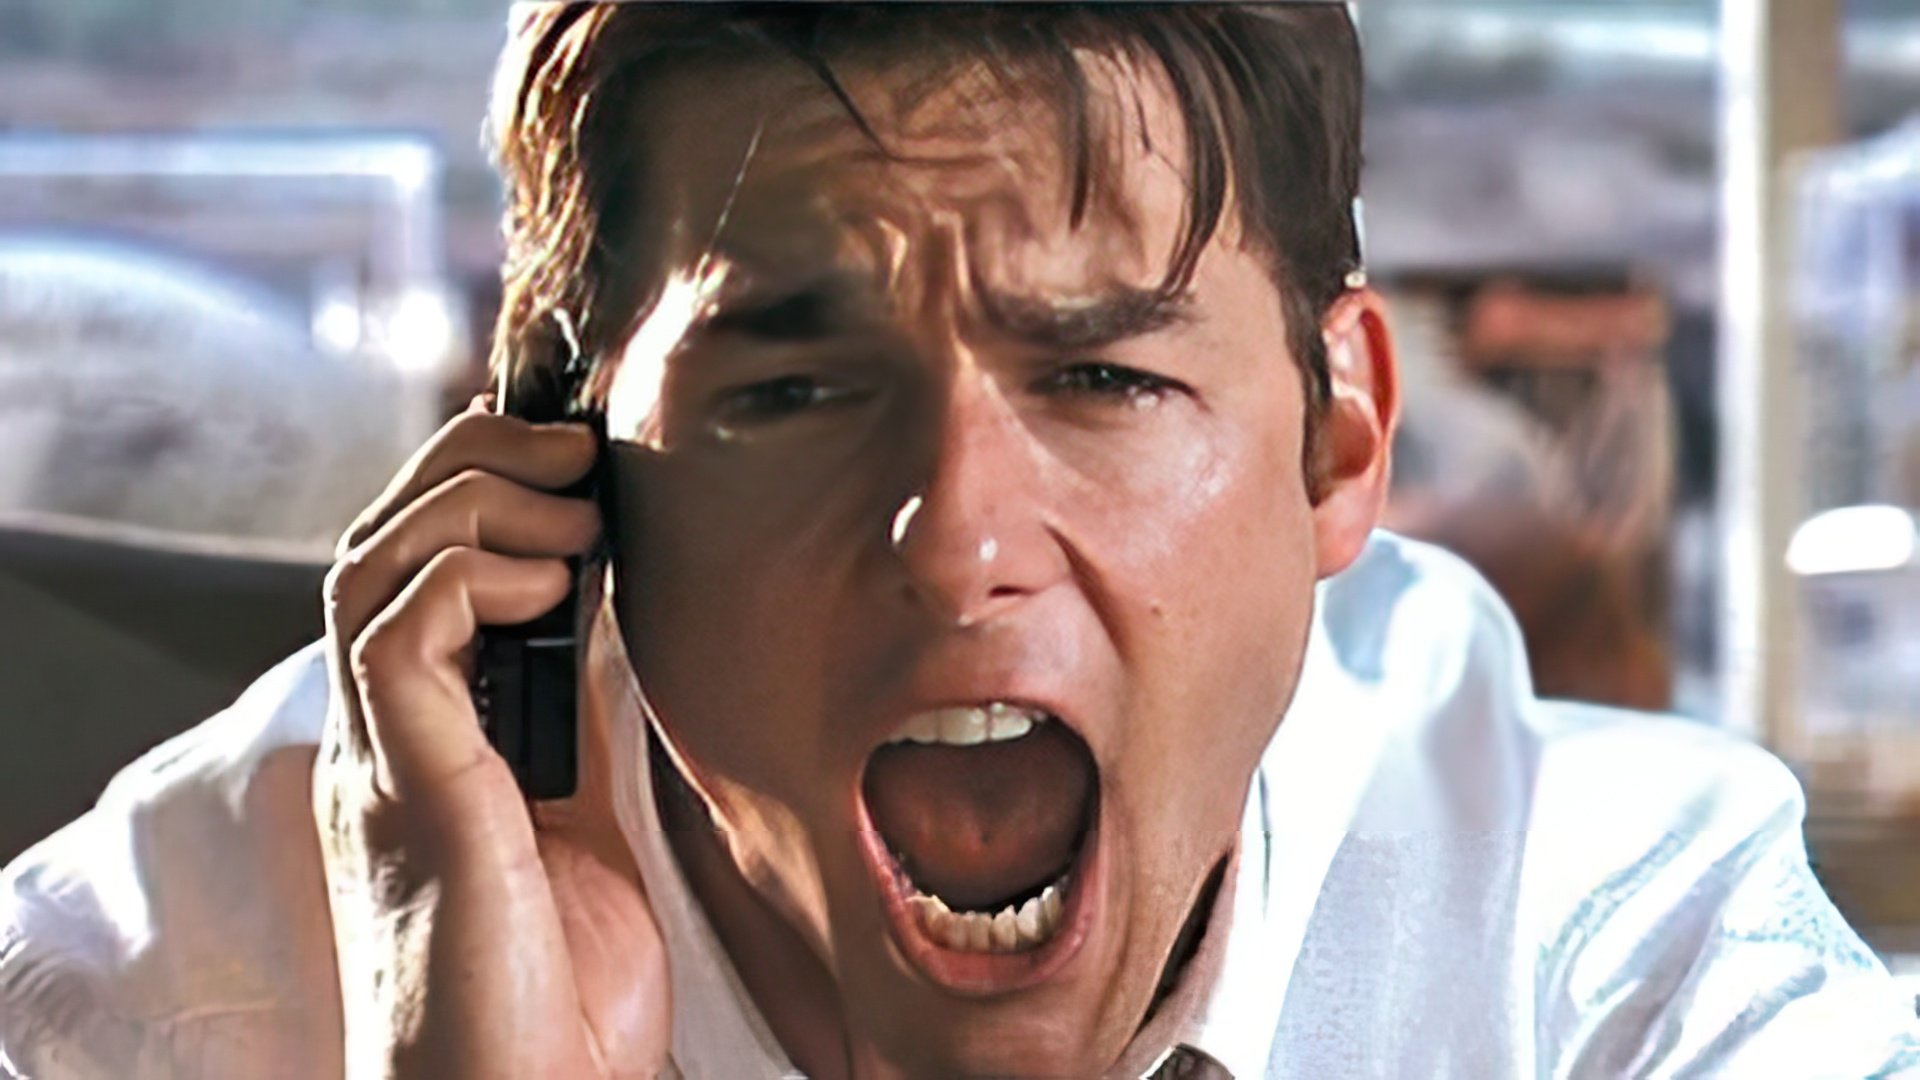 Jerry Maguire earned 5 Academy Awards nominations